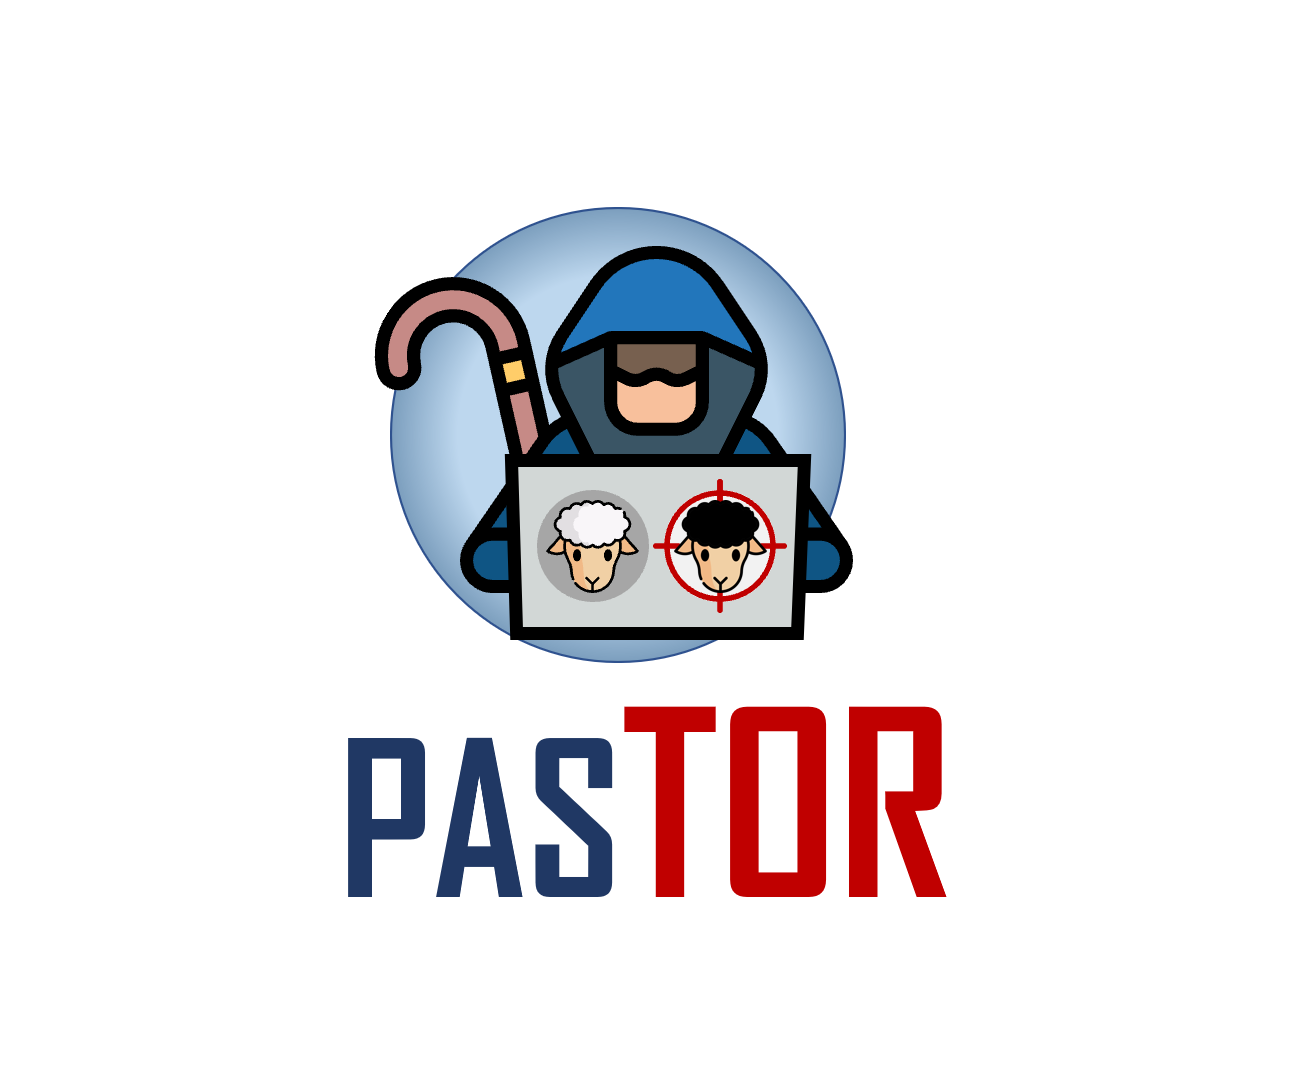 PASTOR: Platform for Analysis of Services on TOR